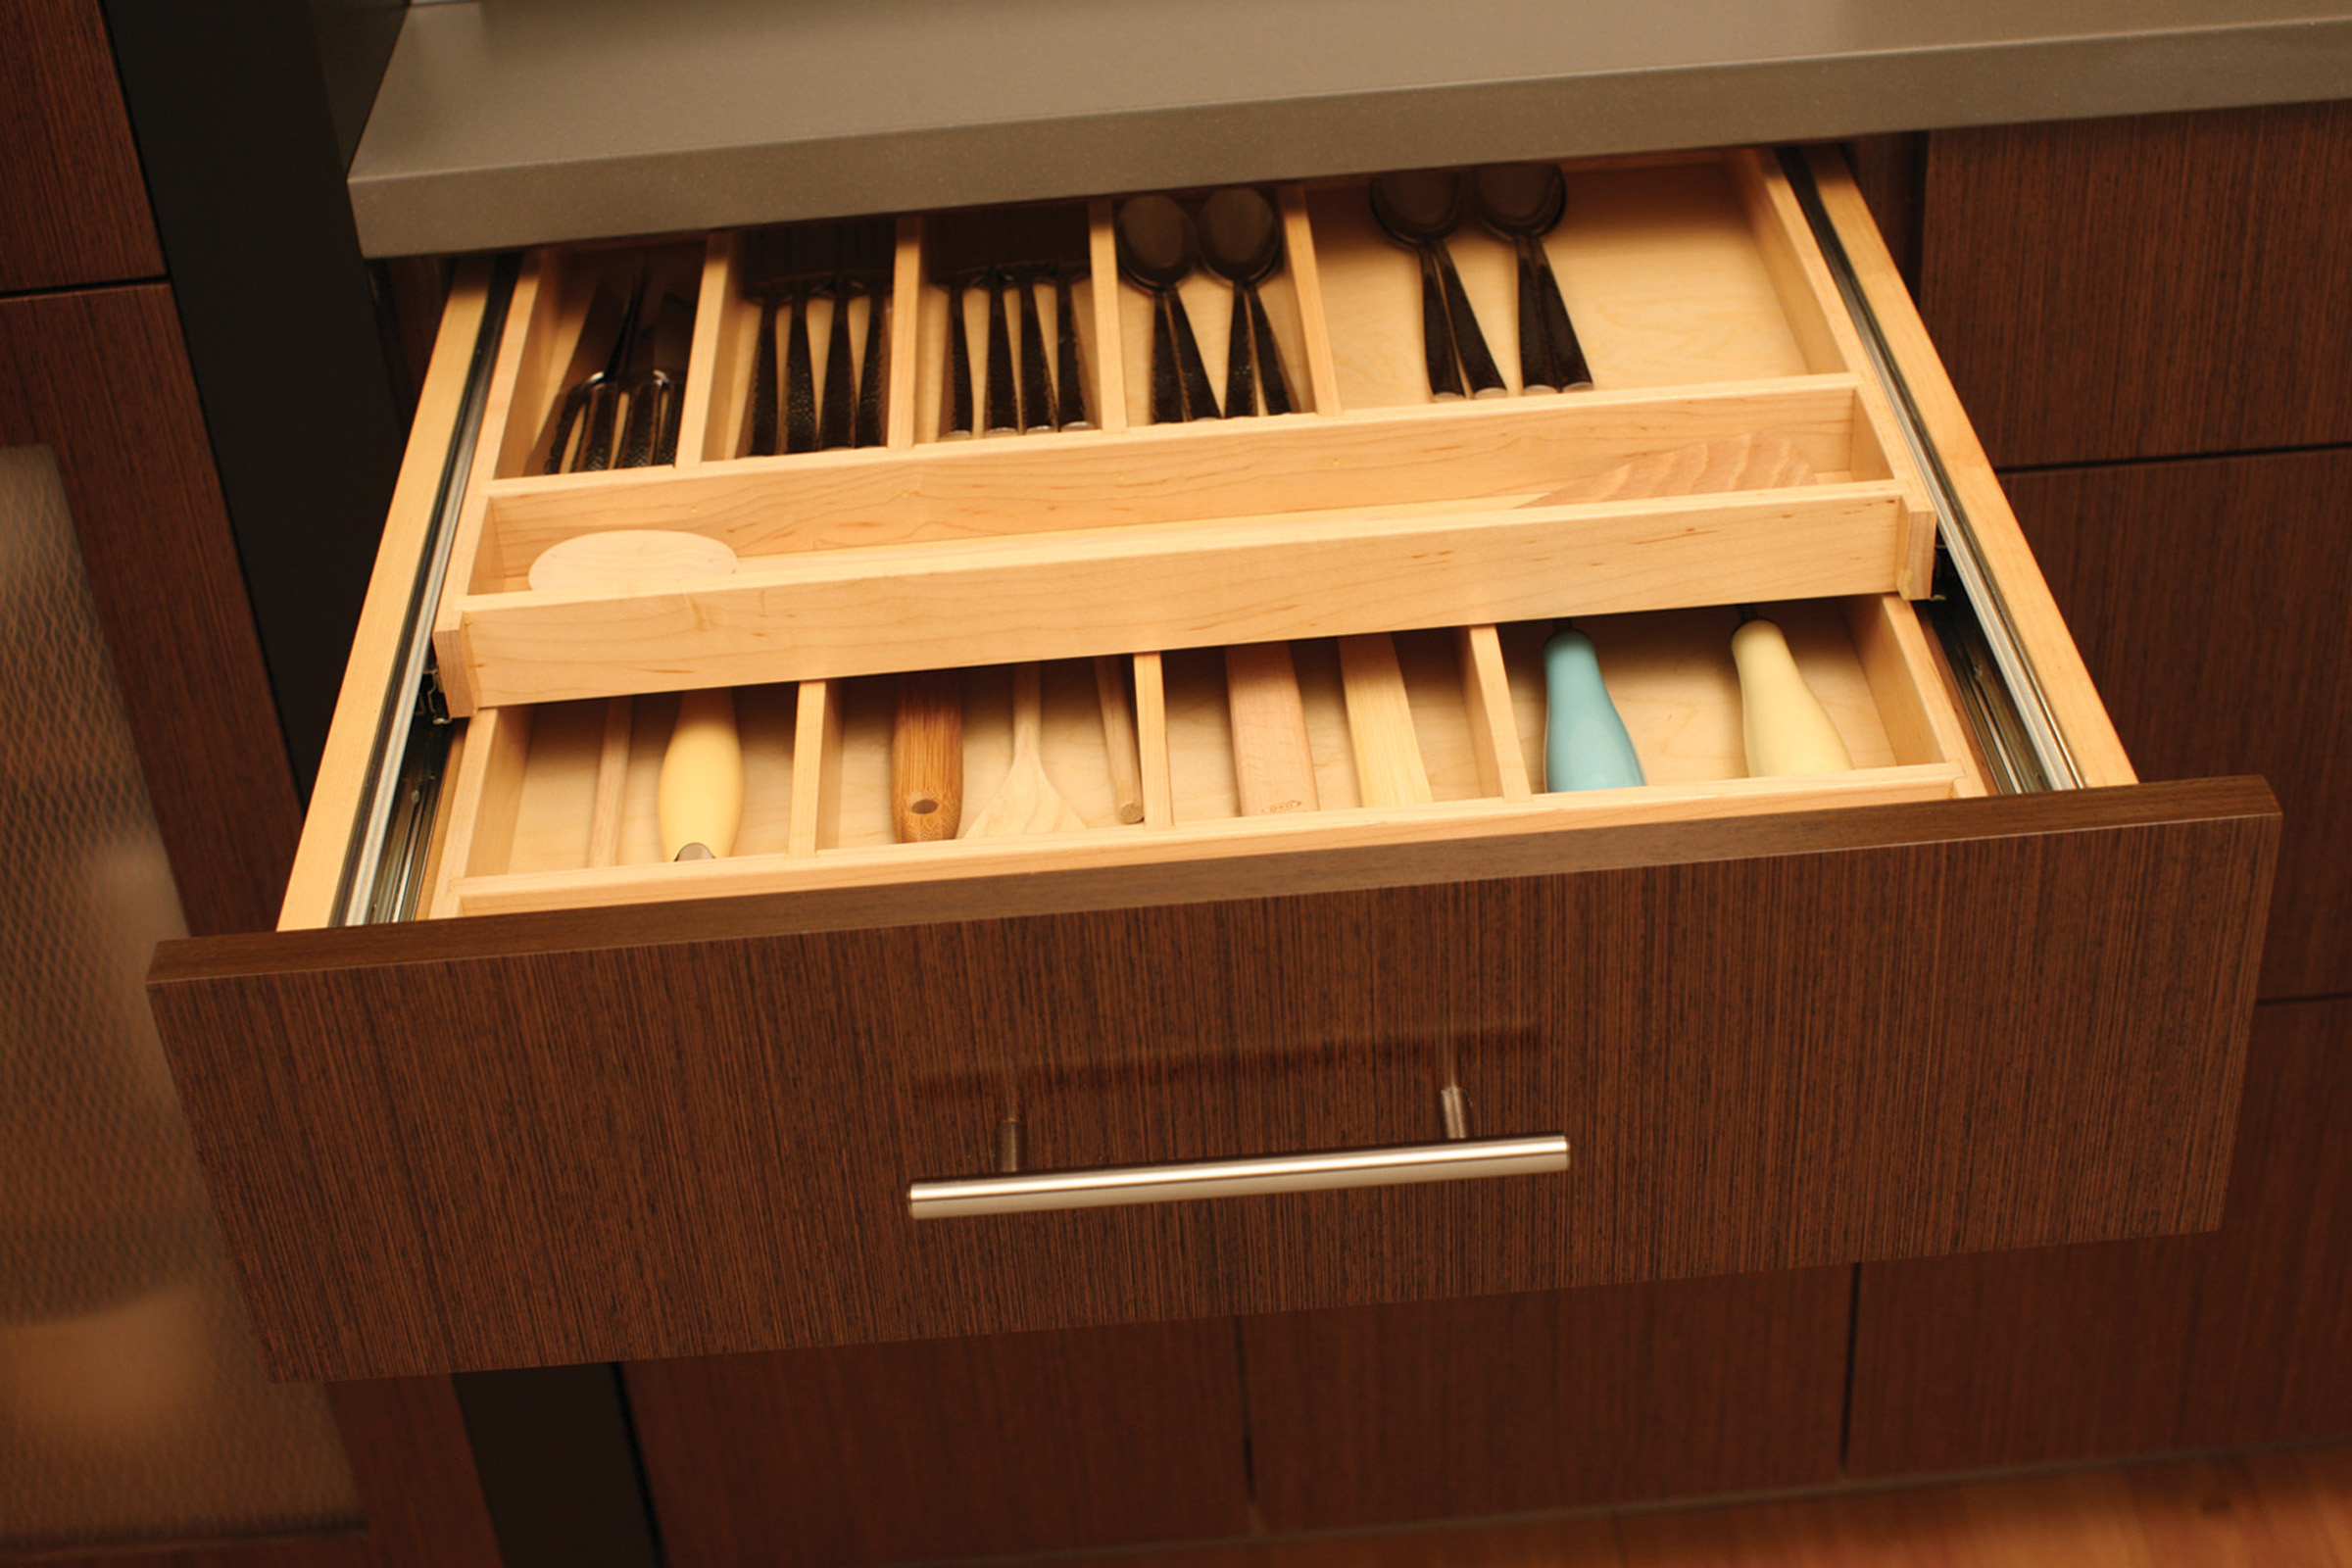 Maximize drawer space with a Two-Tier Wood Cutlery Tray (TTWCT-A) to organize silverware and utensils on two levels within the drawer.